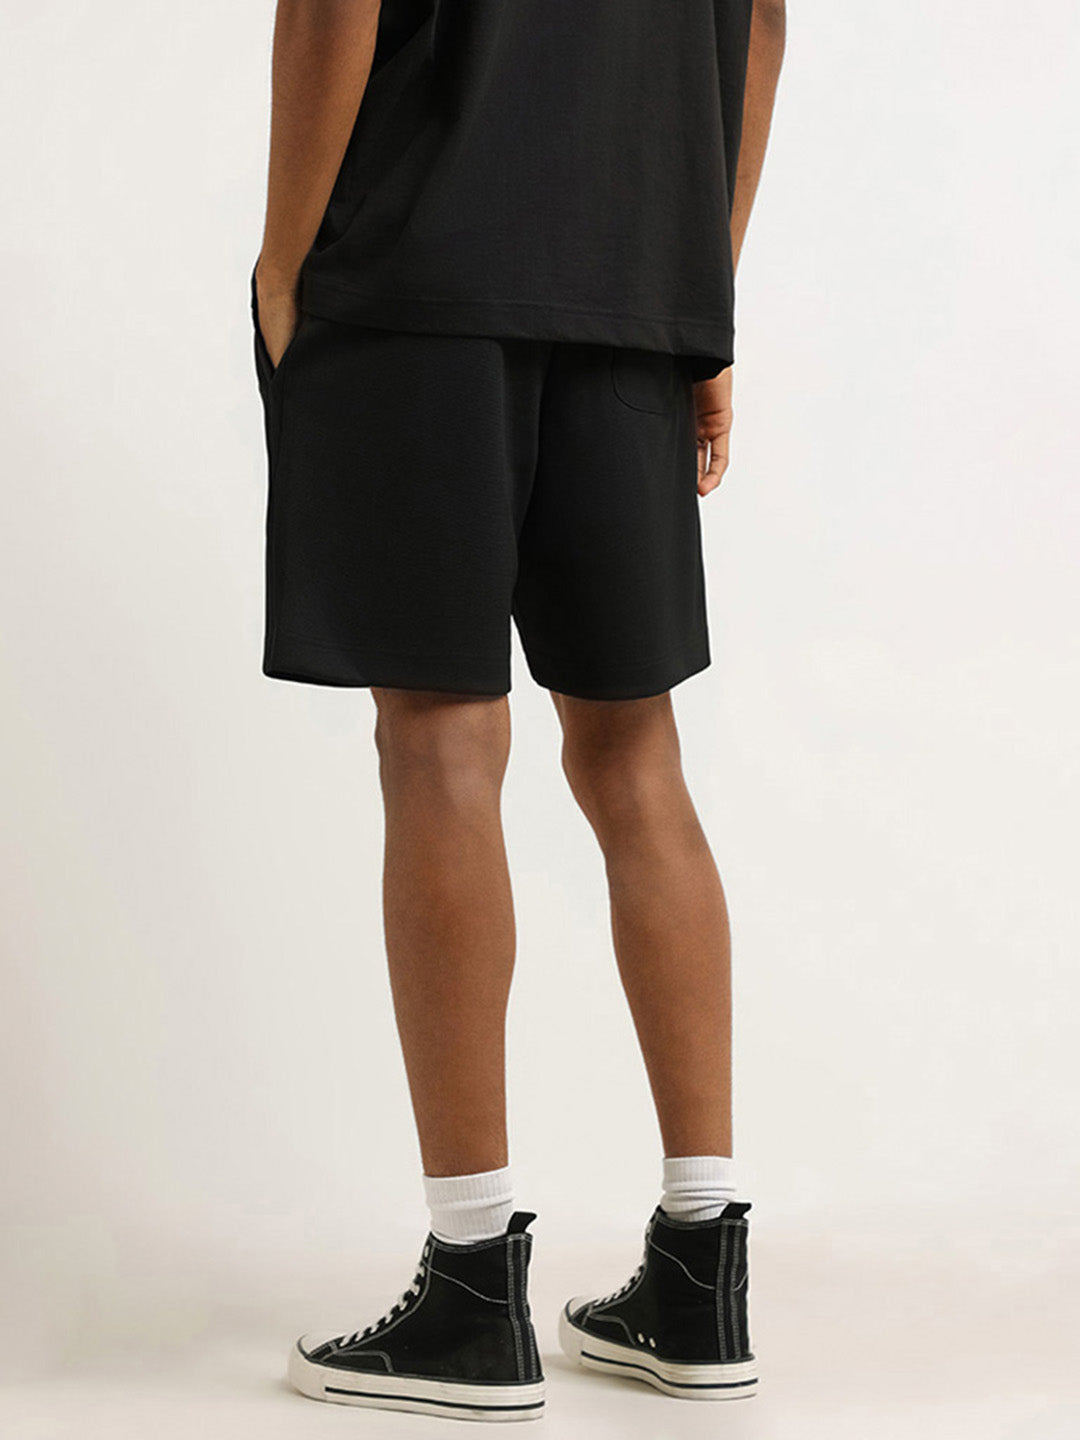 Studiofit Black Self Patterned Cotton Blend Relaxed Fit Shorts